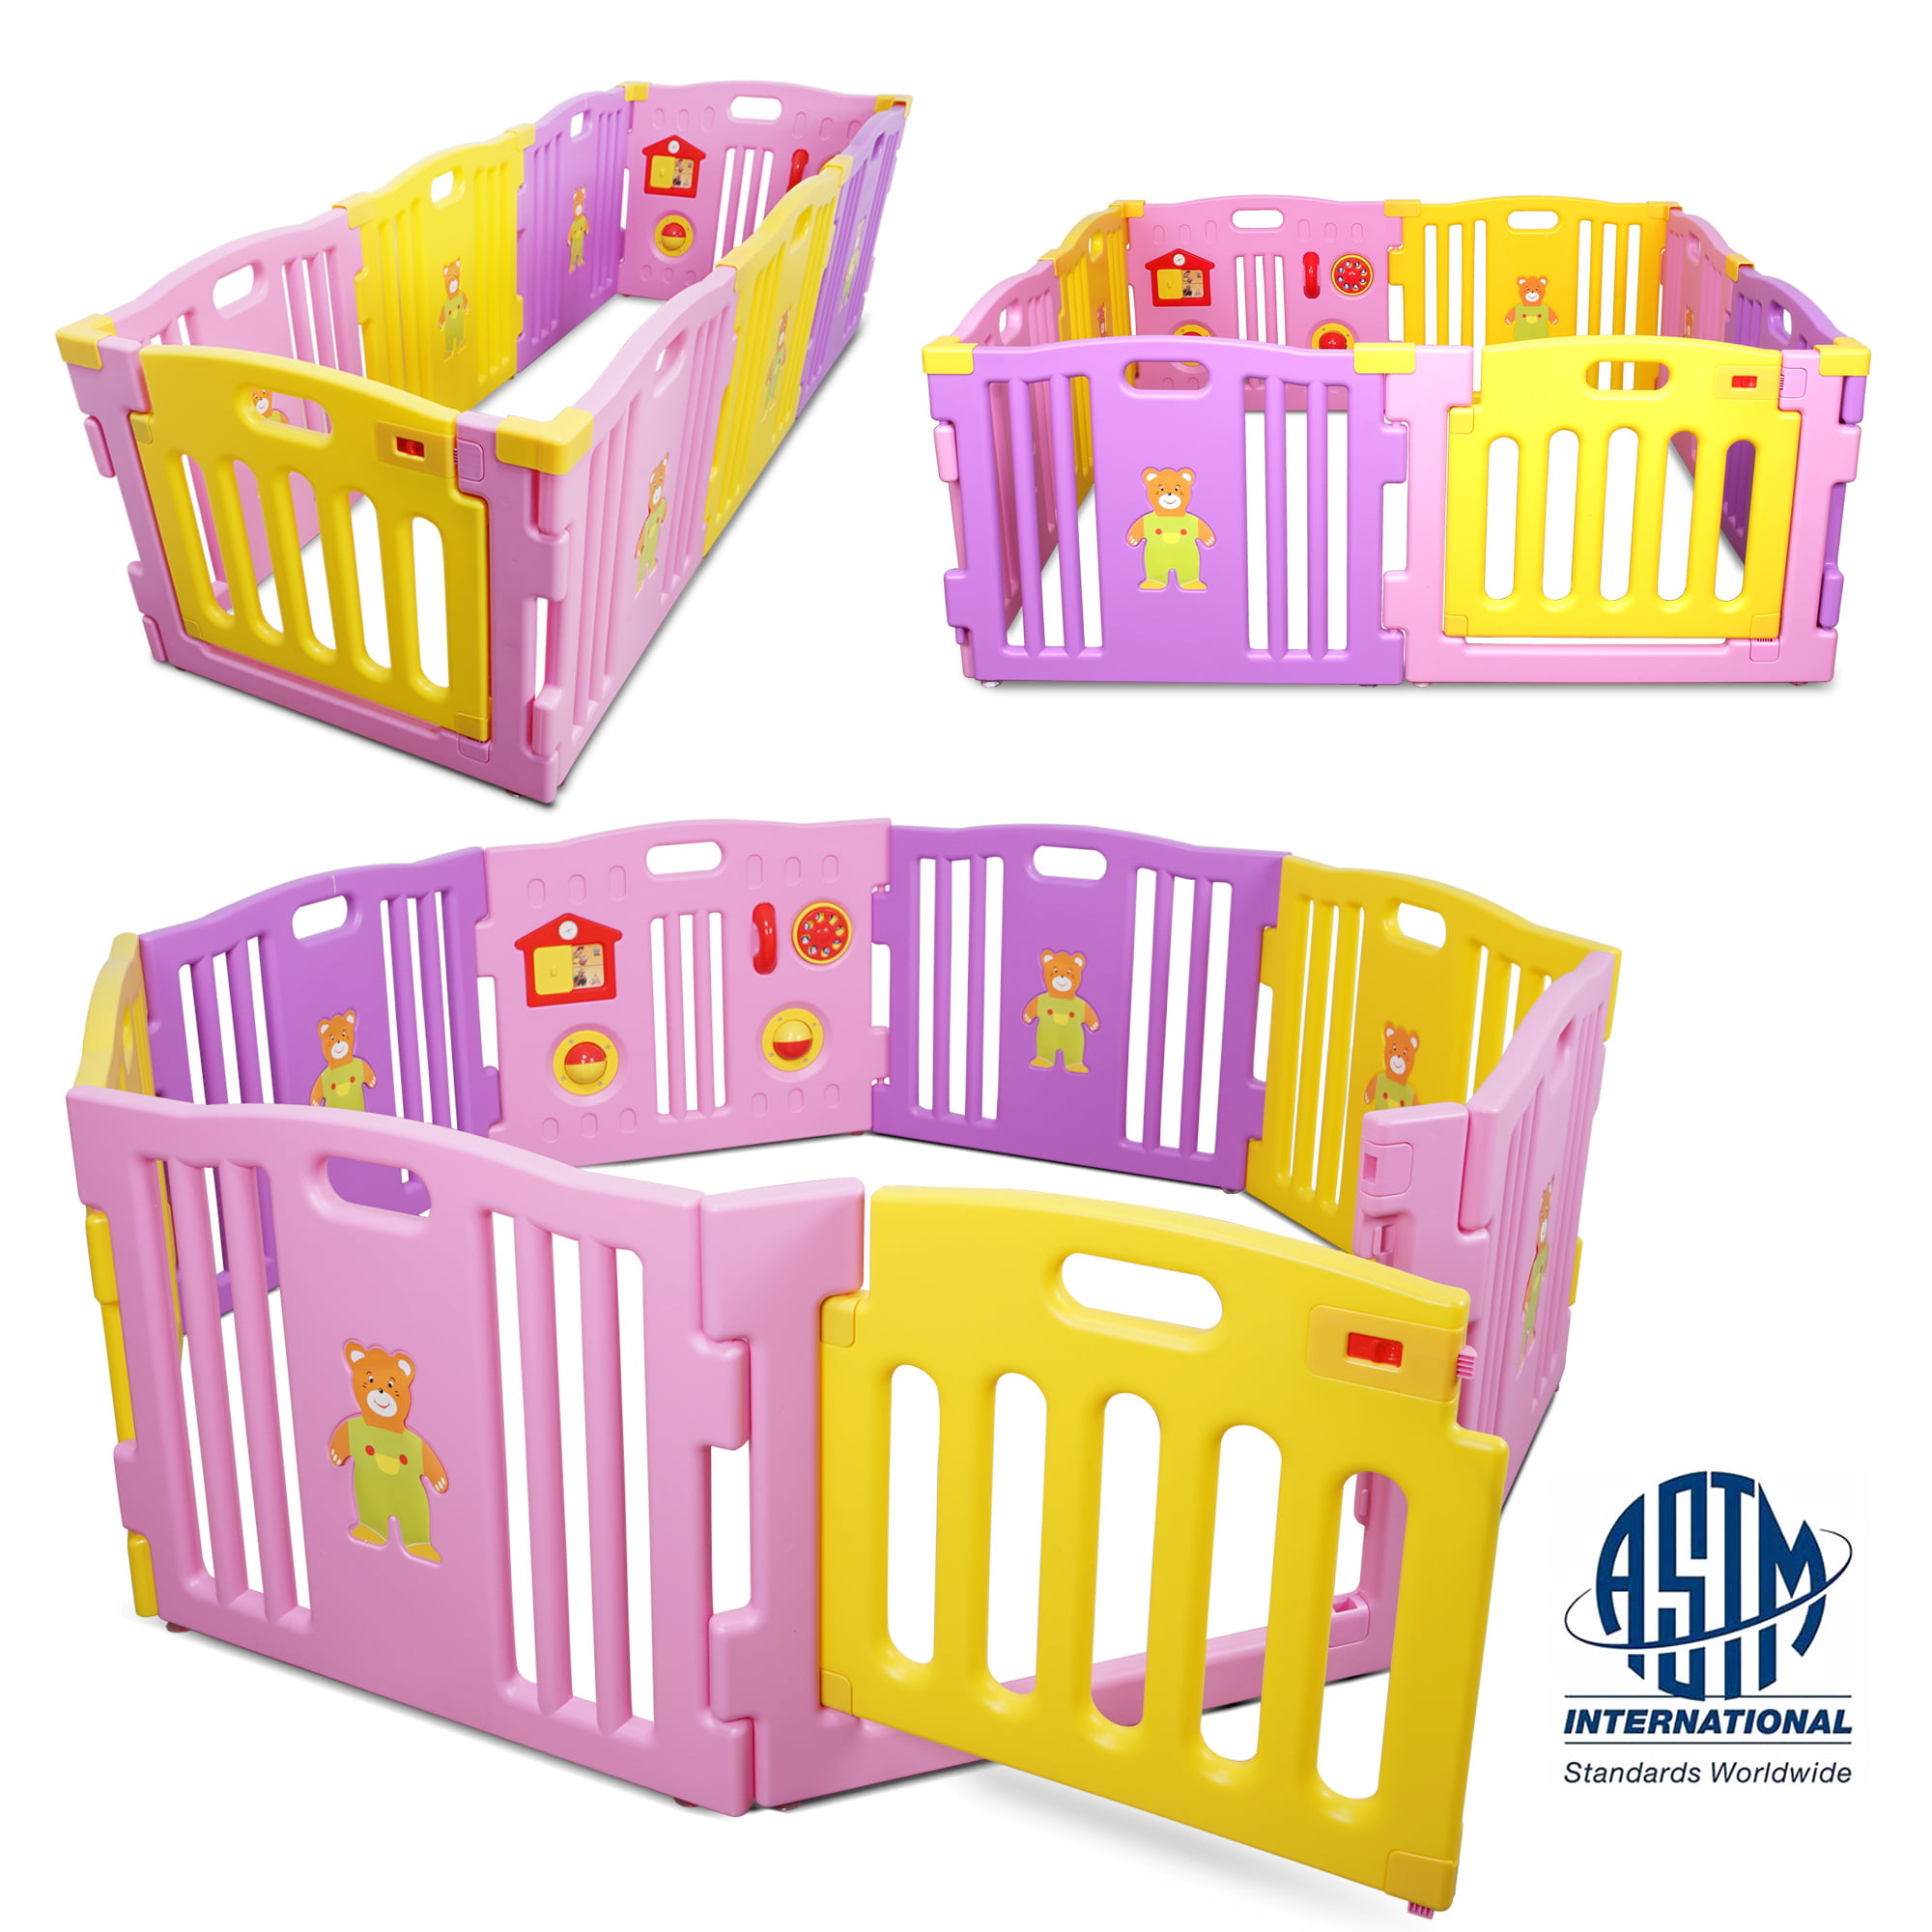 Baby Playpen 8 Panel Kids Safety Play Center Yard Home Indoor Outdoor Fence Pink 